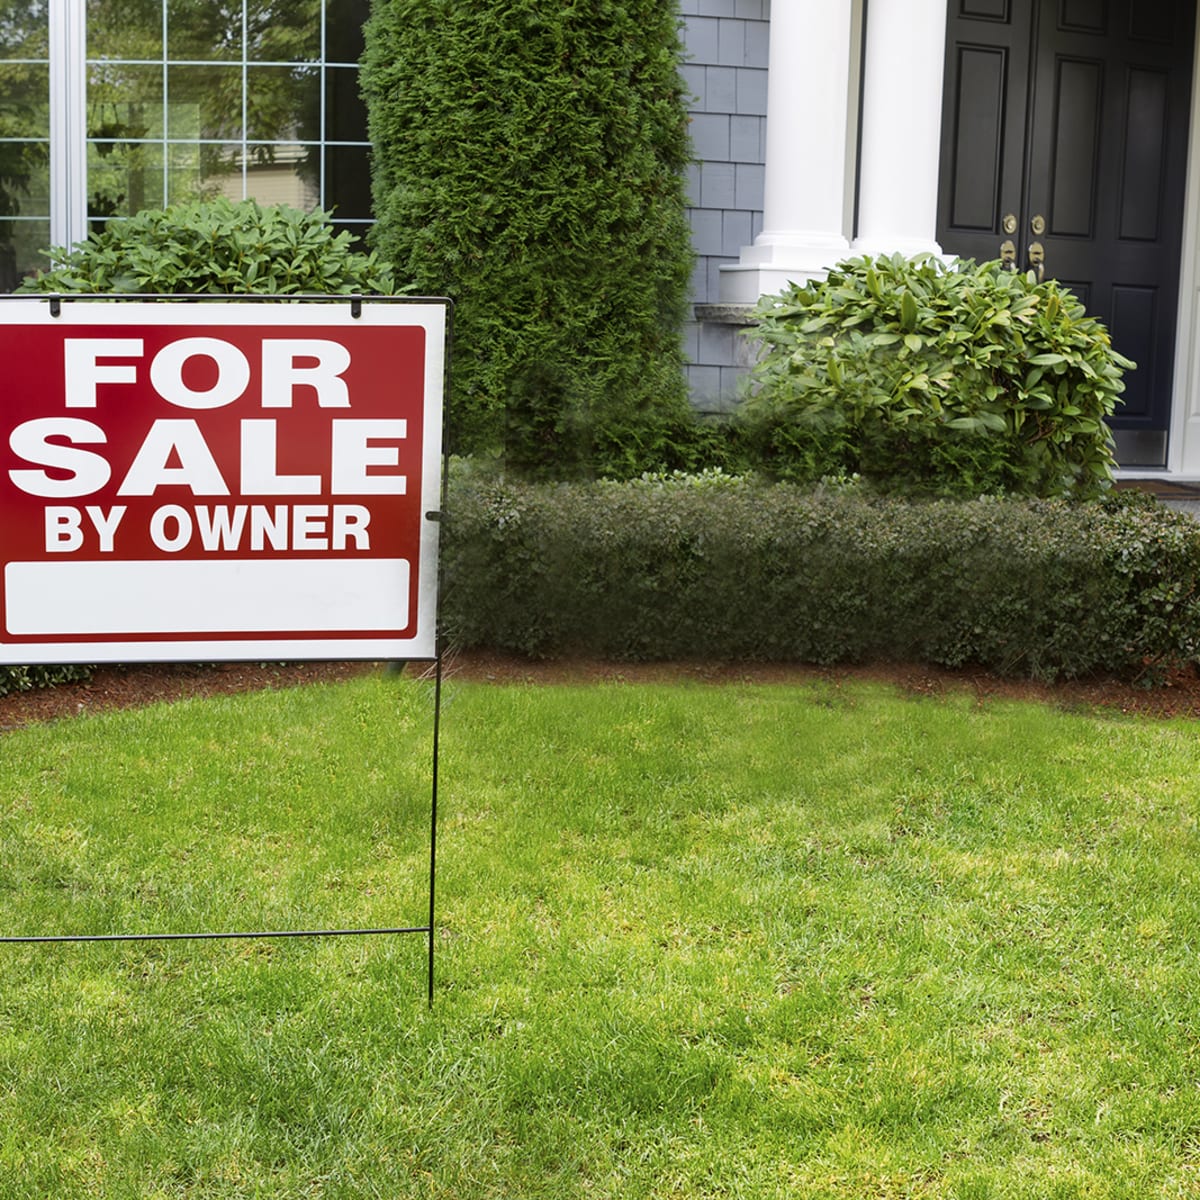 how to buy a house when you need to sell yours